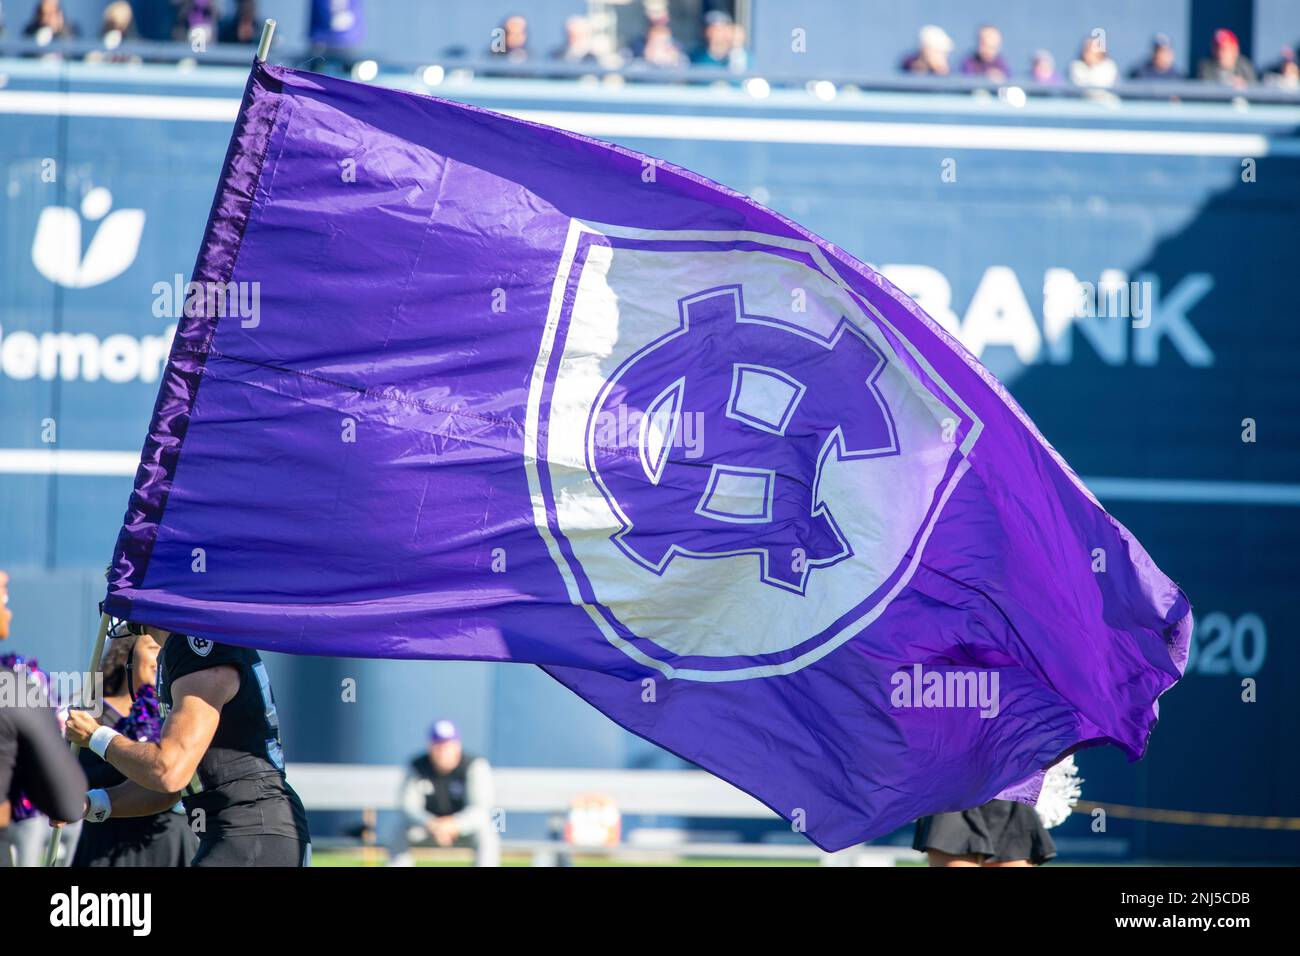 WORCESTER, MA - OCTOBER 08: A general view of a Holy Cross Crusaders flag  prior to the EBW Classic college football game between the Bucknell Bison  and the Holy Cross Crusaders on